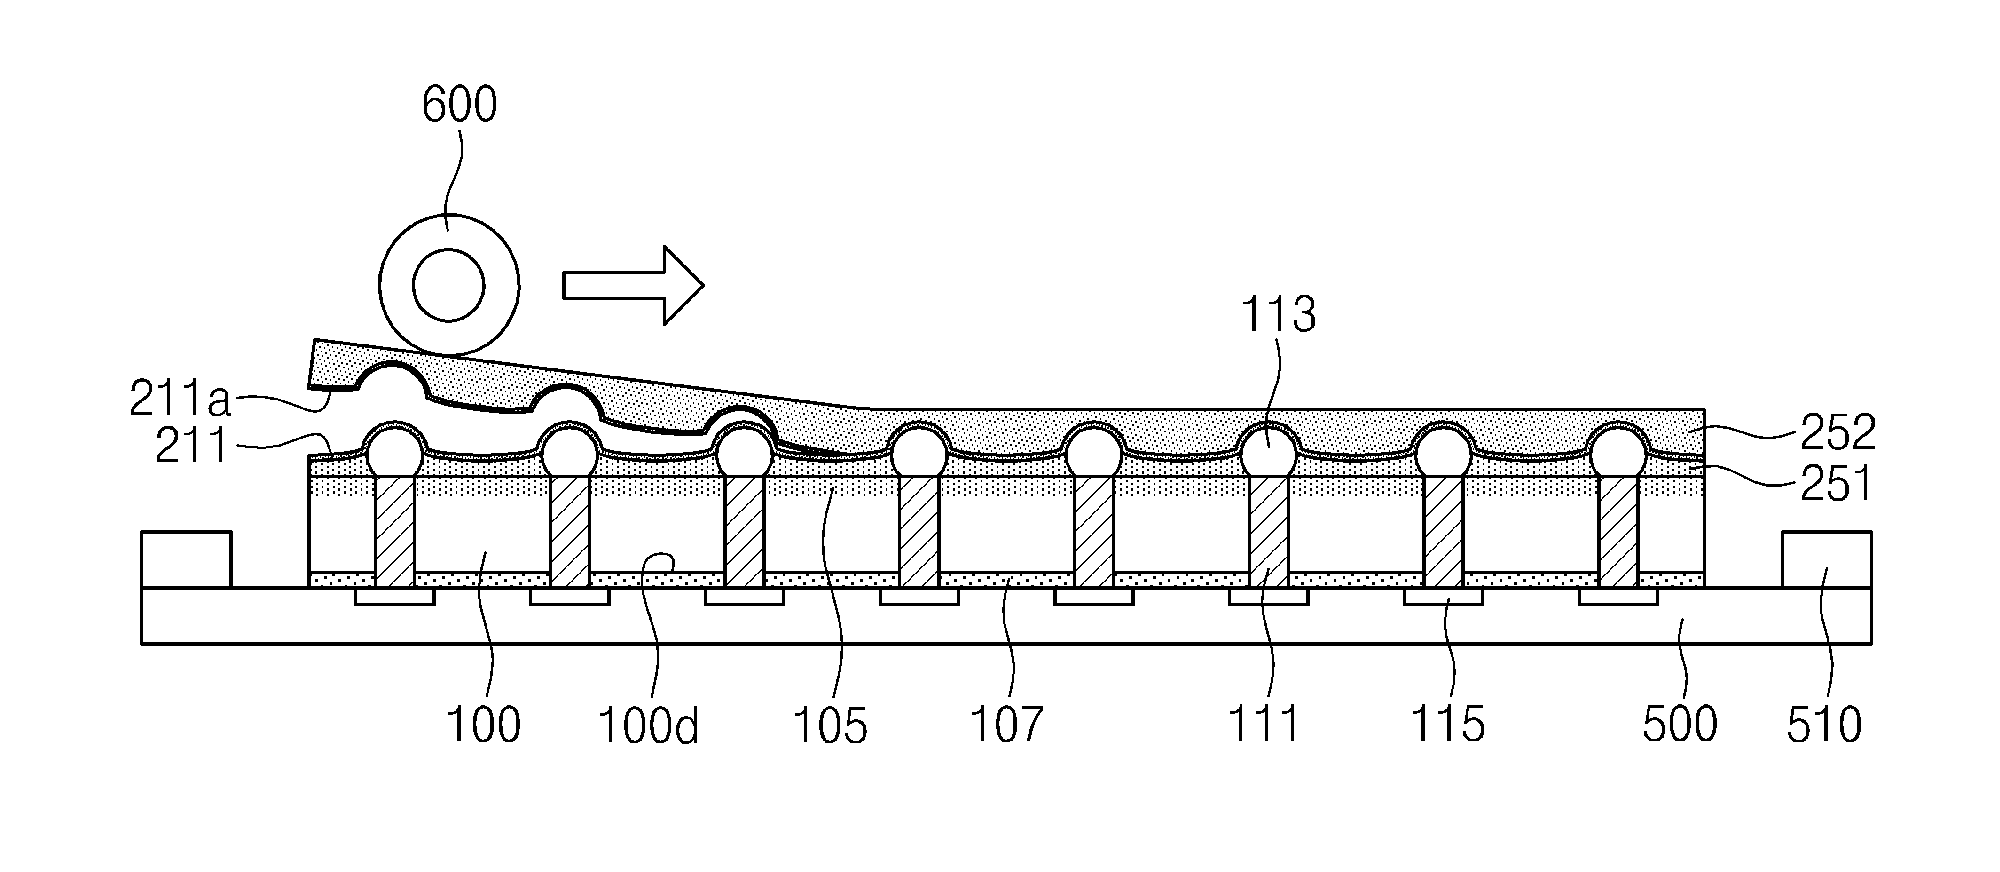 Methods for processing substrates